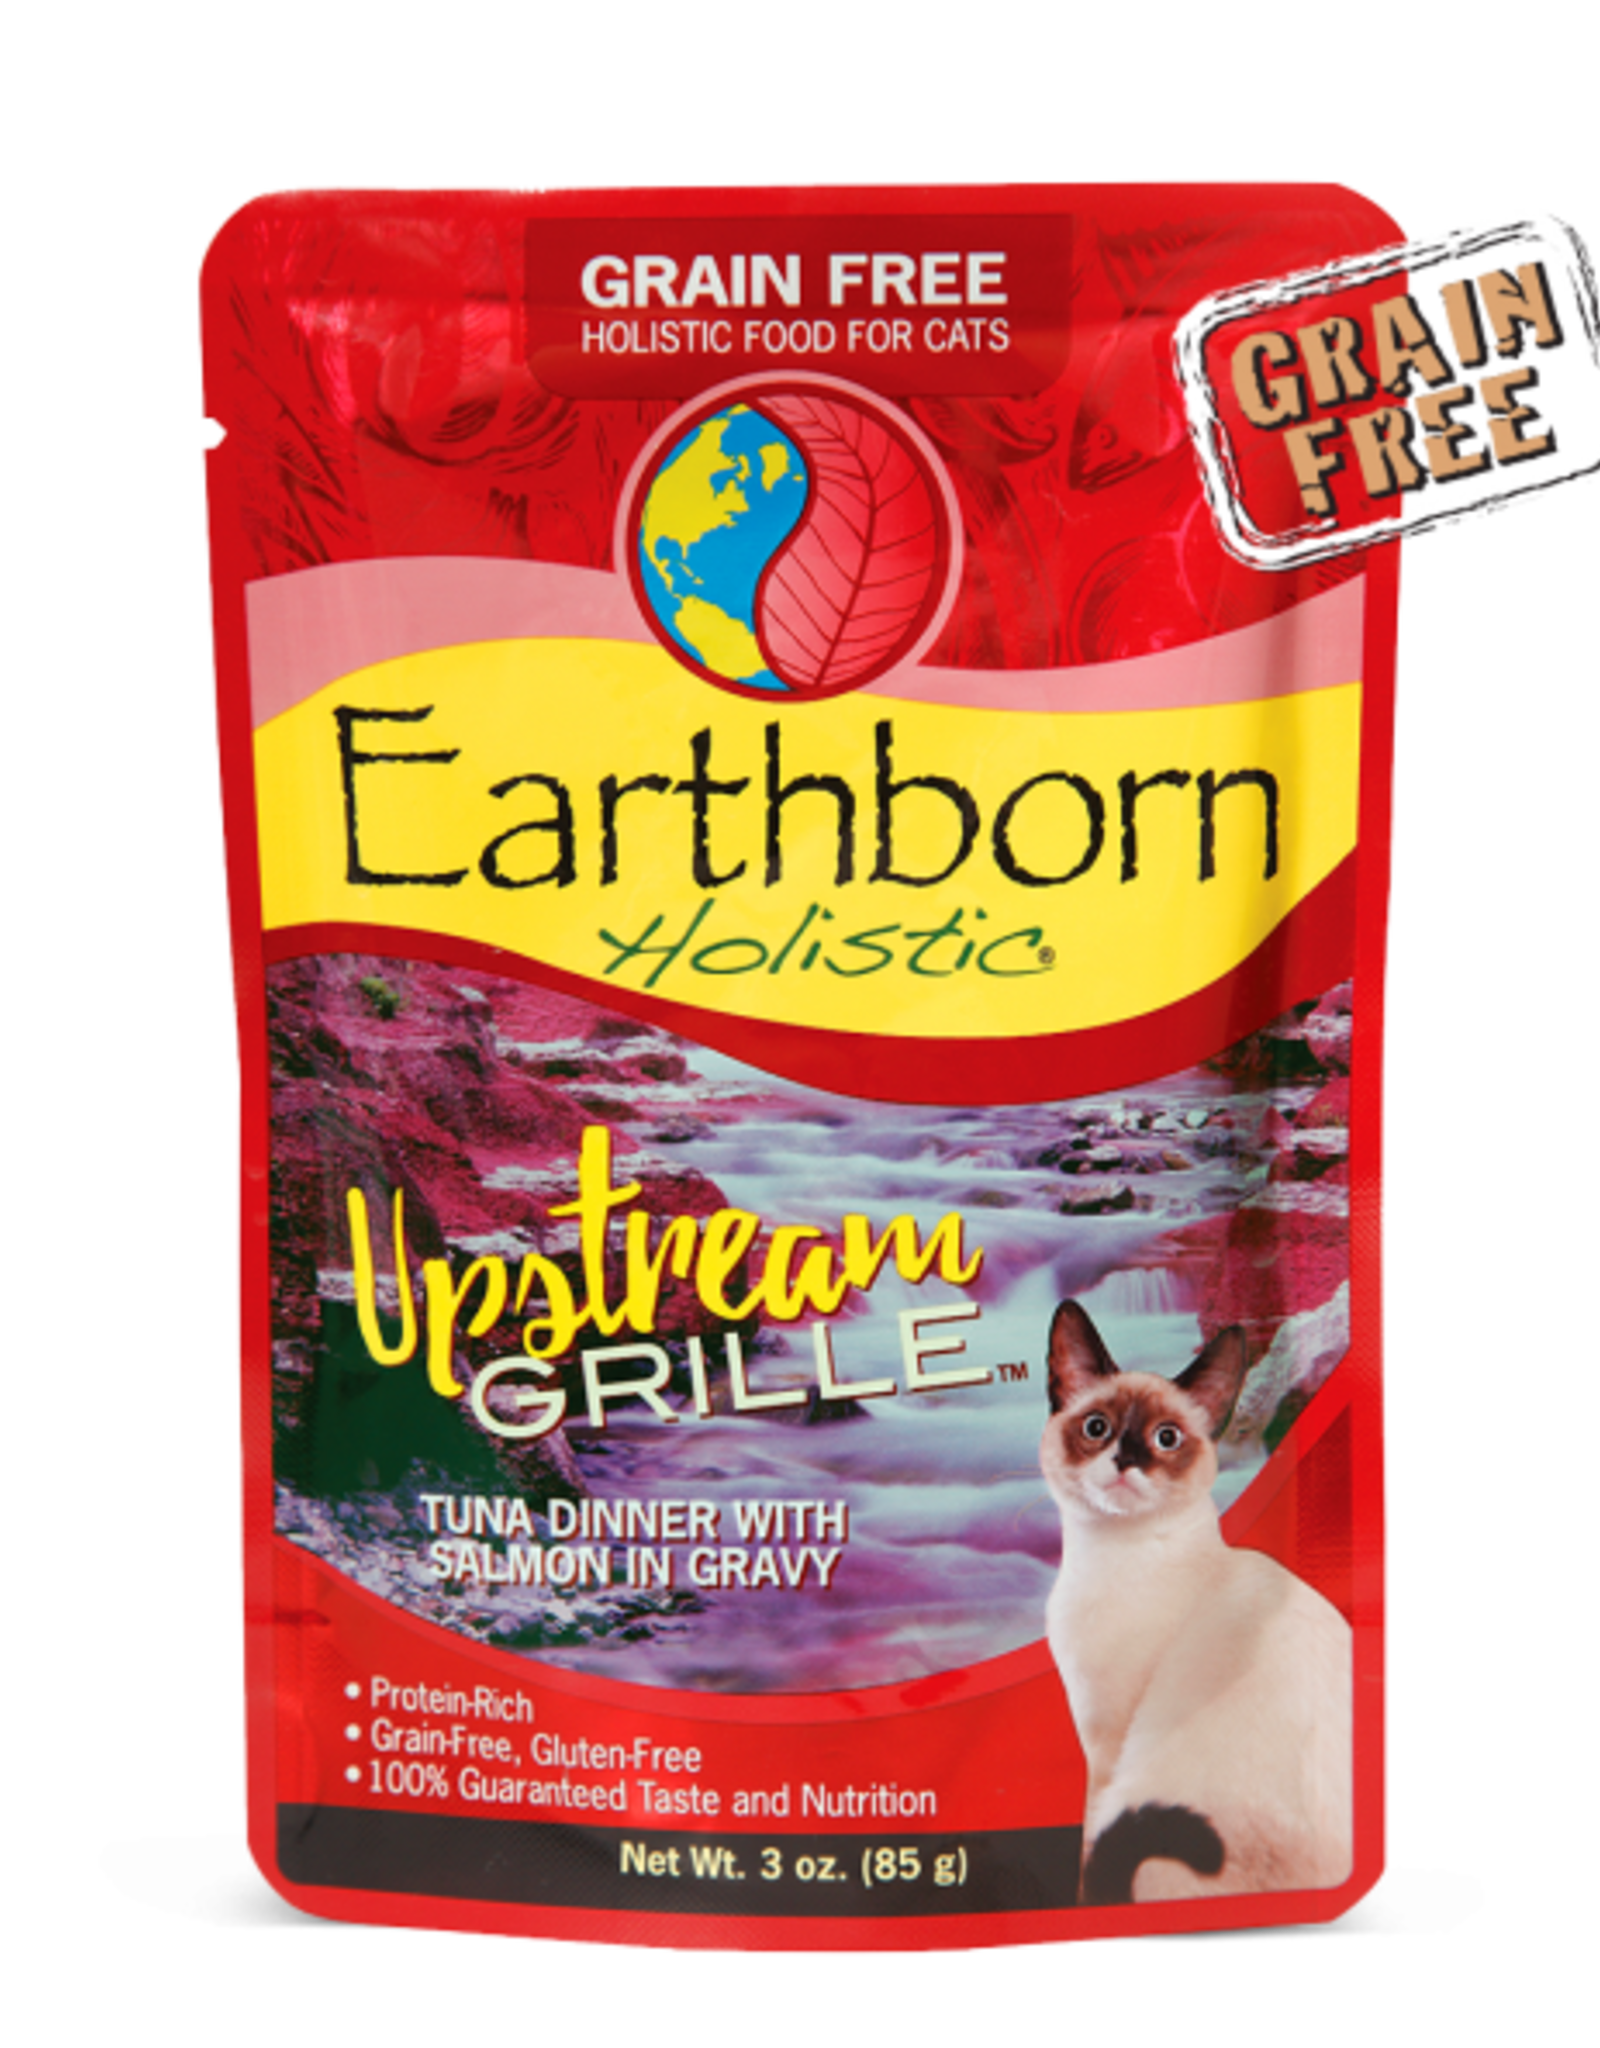 EARTHBORN EARTHBORN HOLISTIC CAT UPSTREAM GRILLE POUCH 3OZ CASE OF 24